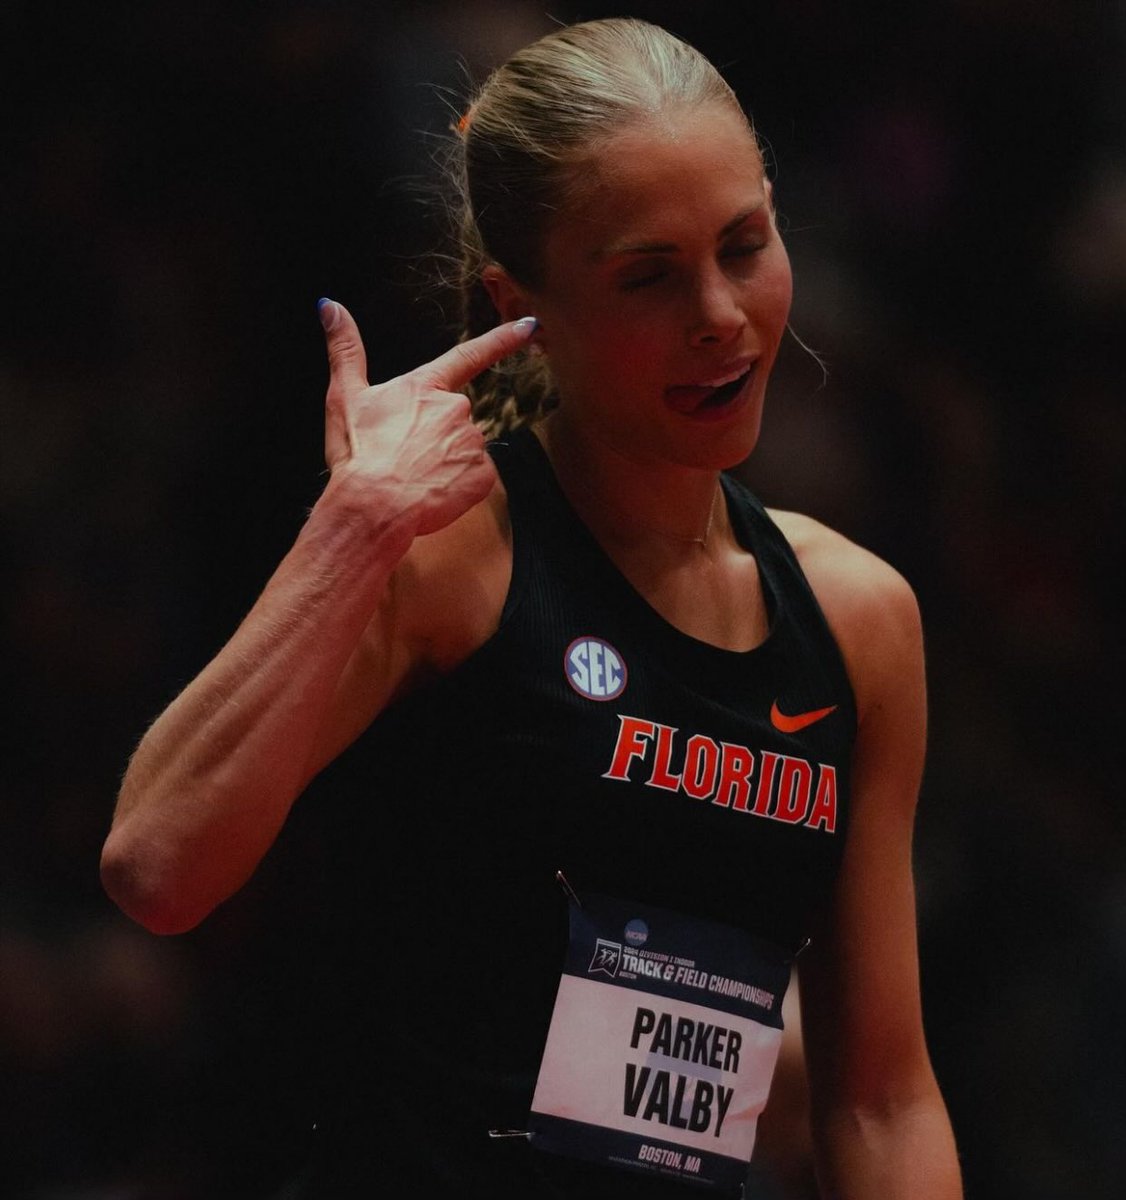 Parker Valby 🤝 Breaking Record Valby breaks the collegiate 10k record with 30:50.43 in California! 🐊 The Gator has more records than Michael Jackson and she's not done yet! (📸 eavzls)